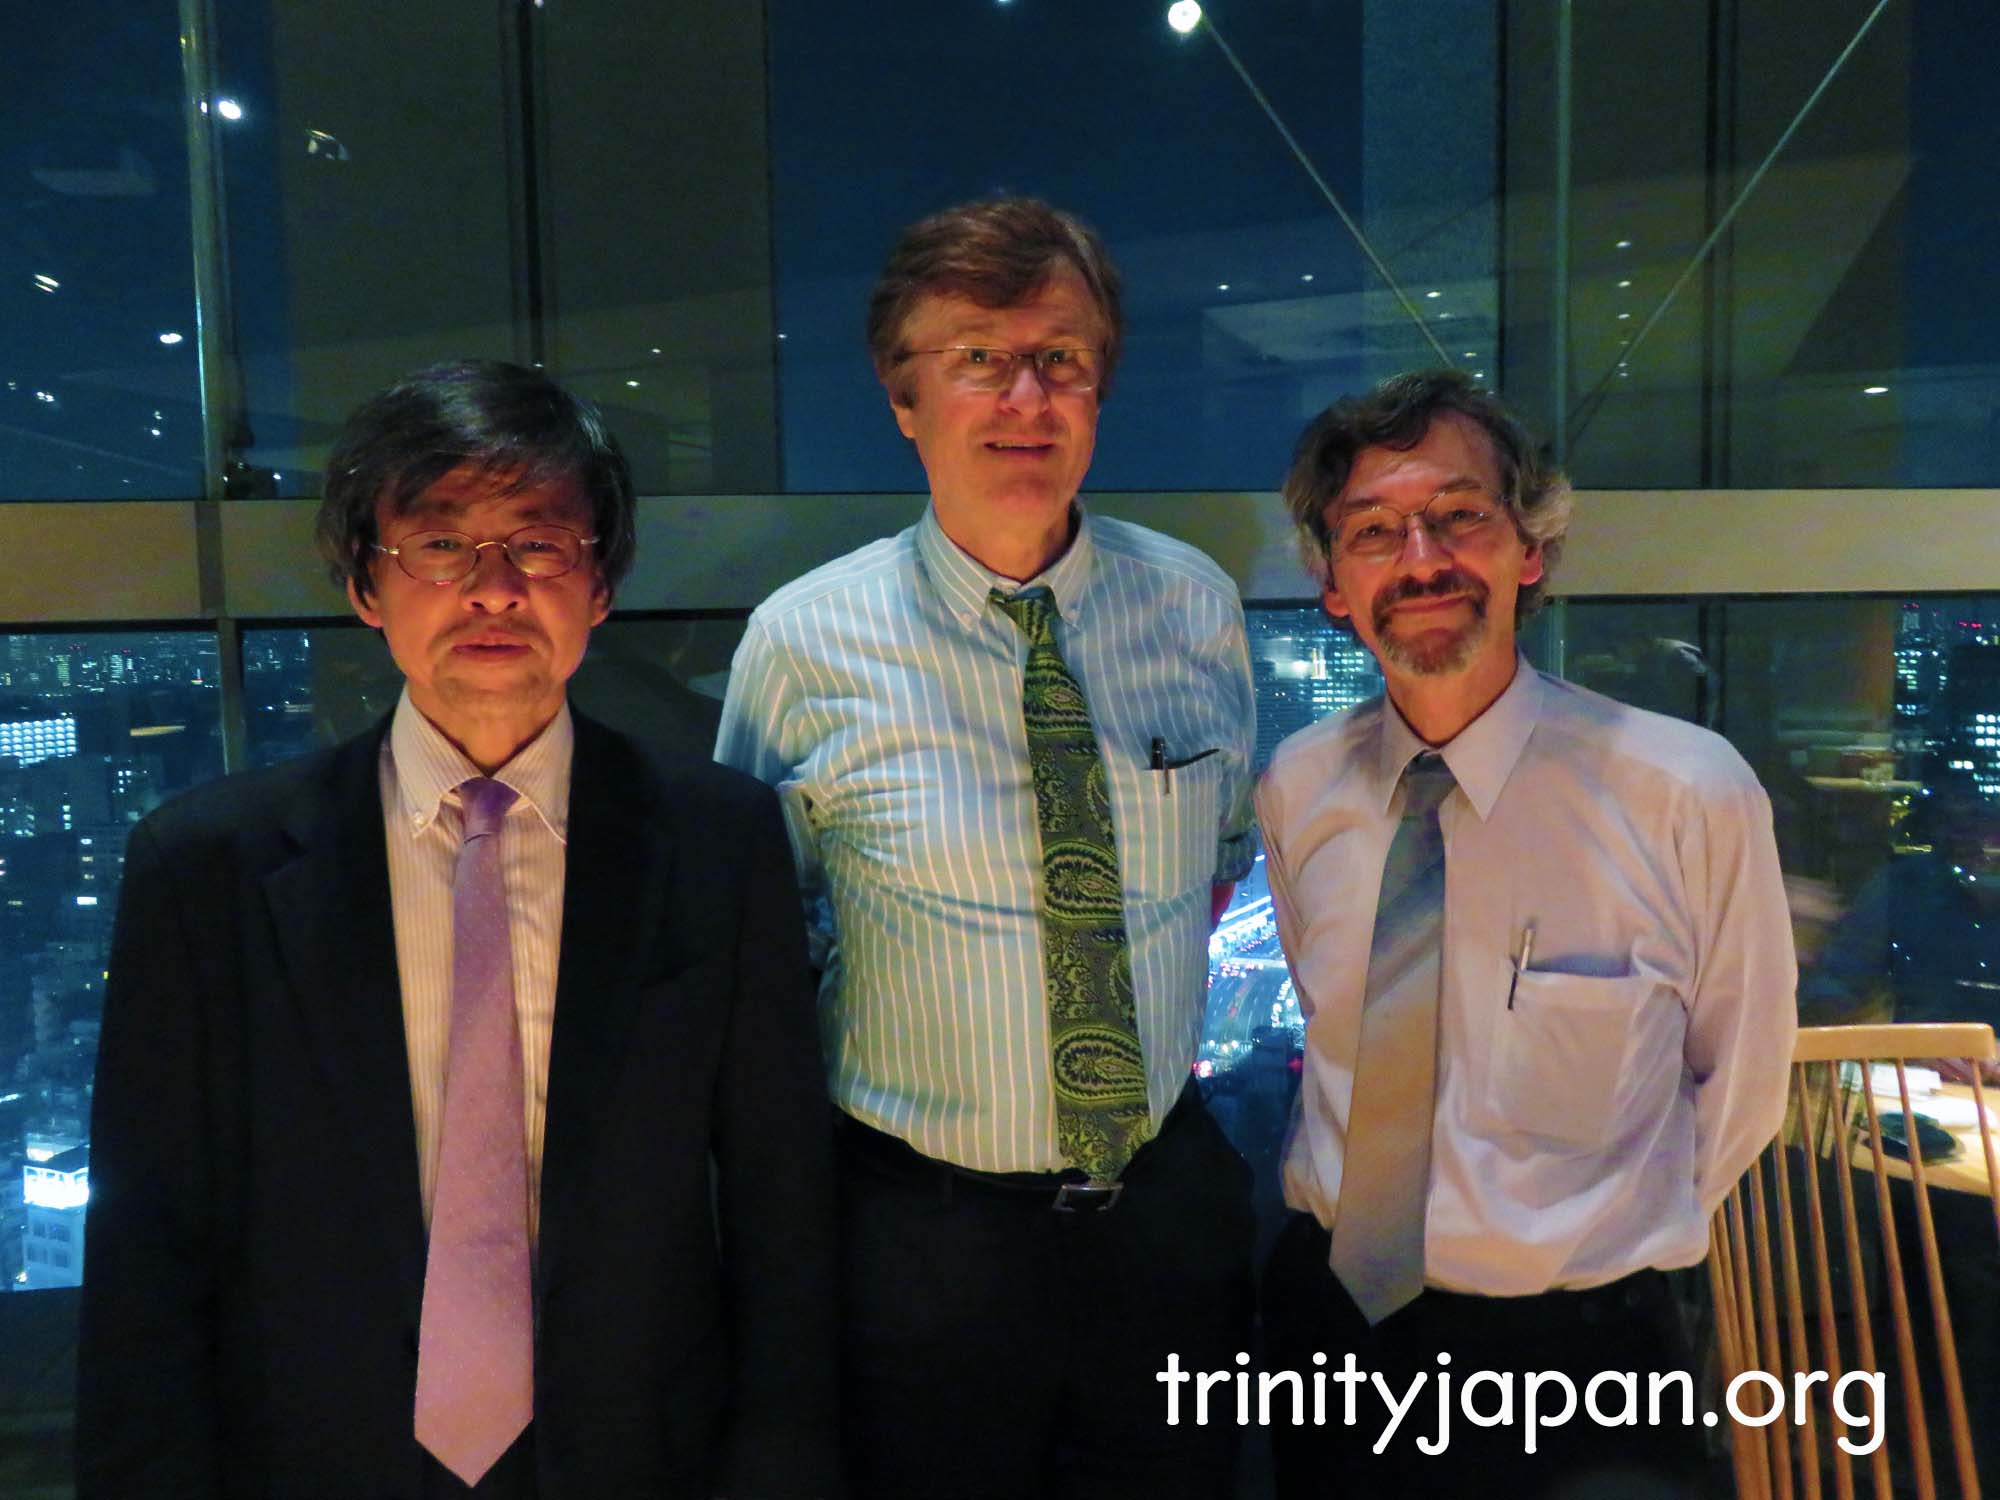 Trinity in Japan Meeting on Friday 27 May 2016 at 19:00 in Tokyo